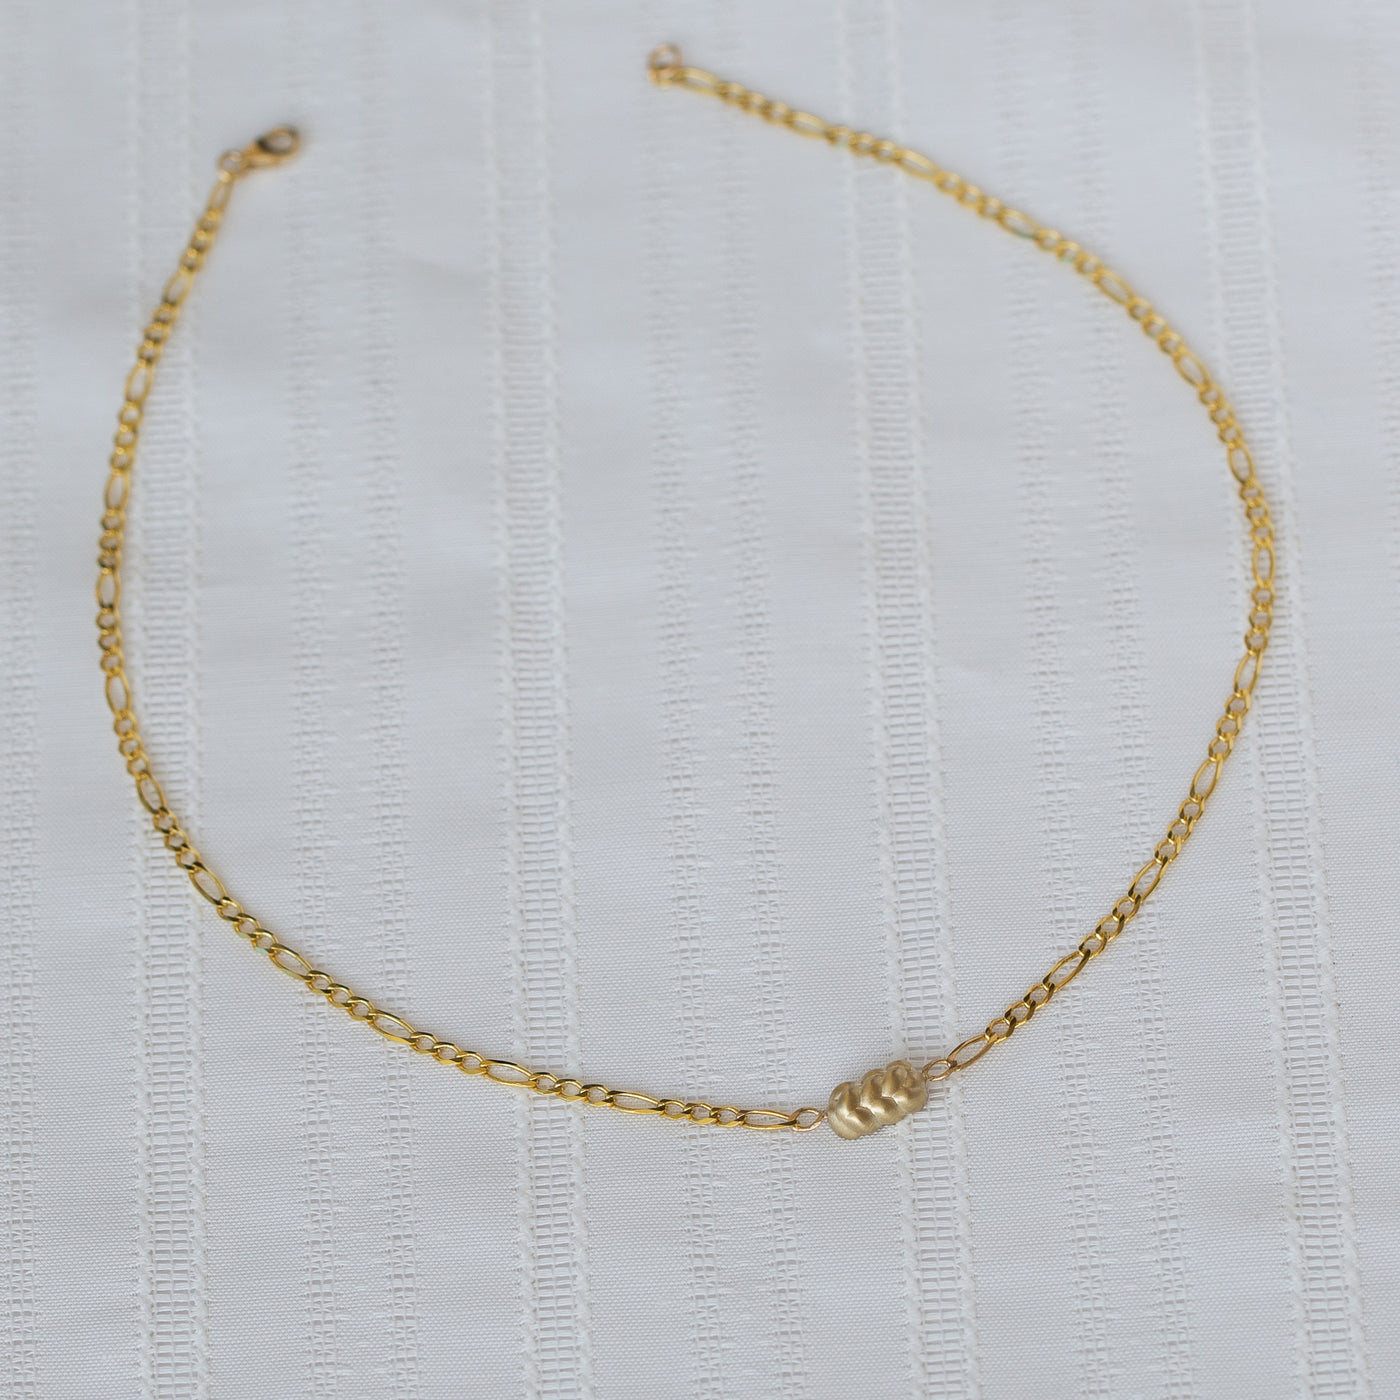 This is a stunning 14K Gold Challah charm Necklace, the perfect Jewish pendant gift for yourself or a loved one.